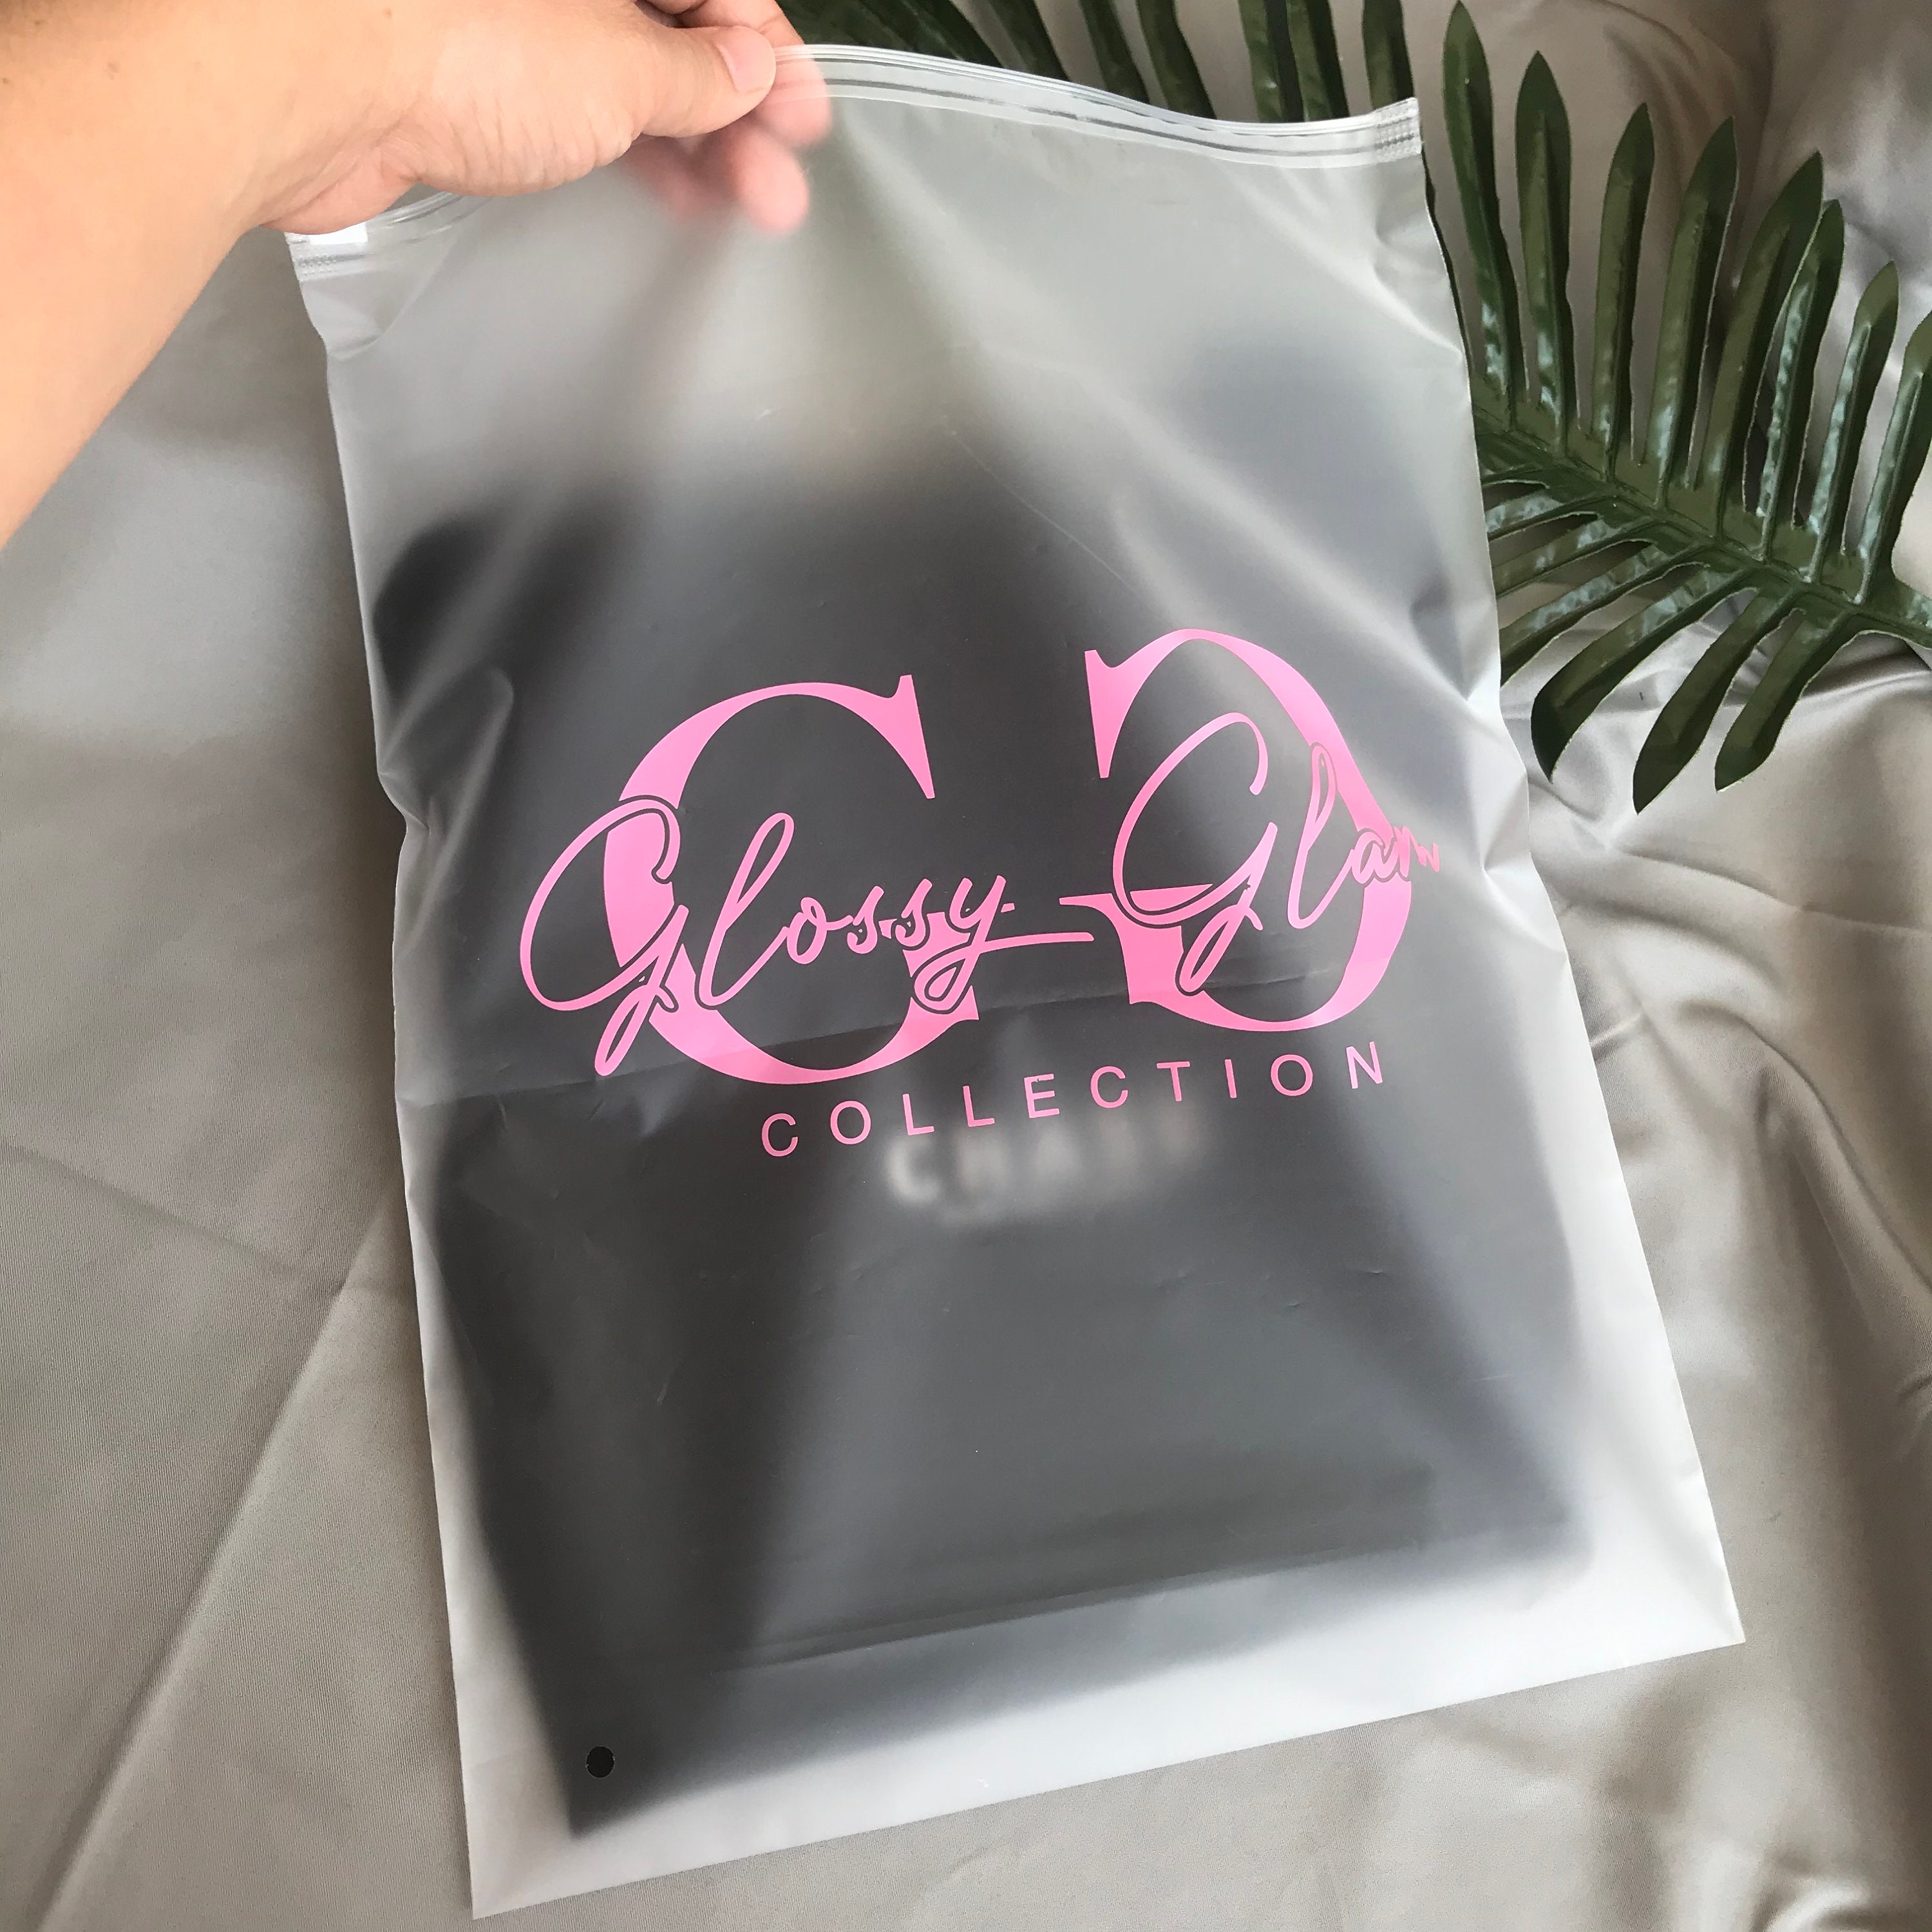 Htovila 50pcs Packaging Bags Frosted Bag Zipper Bag Poly Bags Resealable Slider Closure Storage Bag Pouch for T Shirts Clothes Make Up Shipping